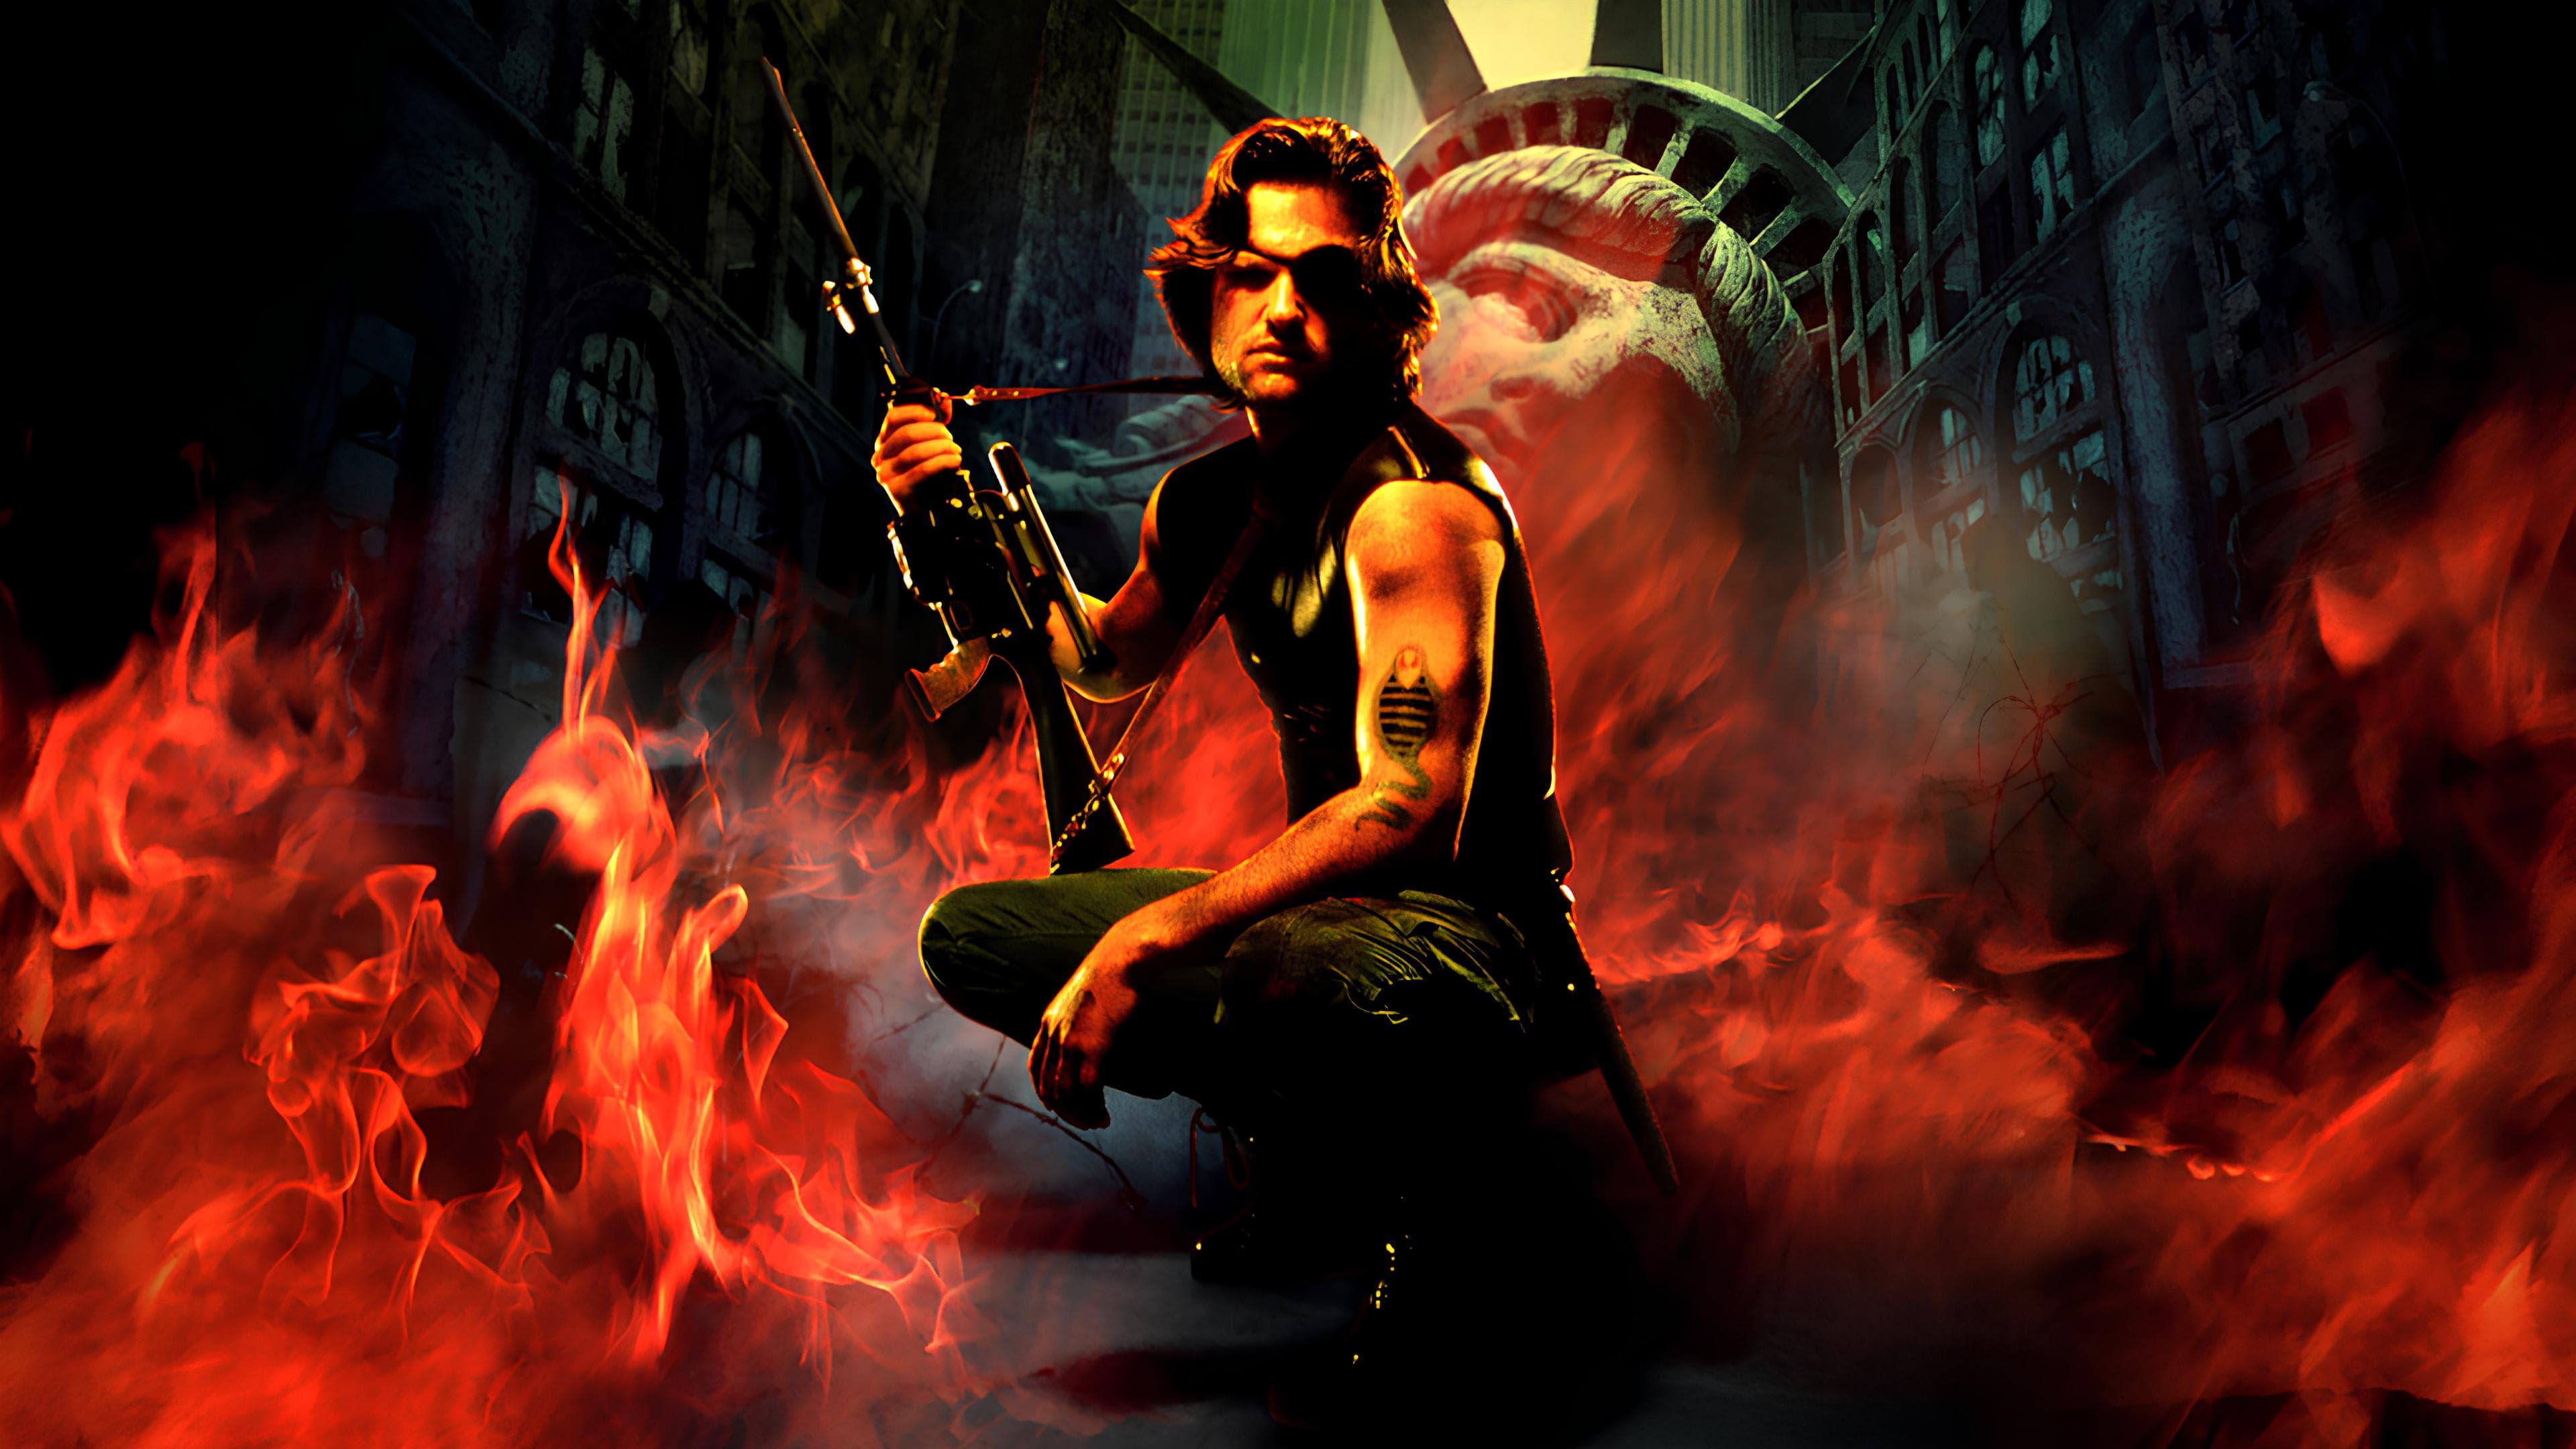 Escape from New York backdrop